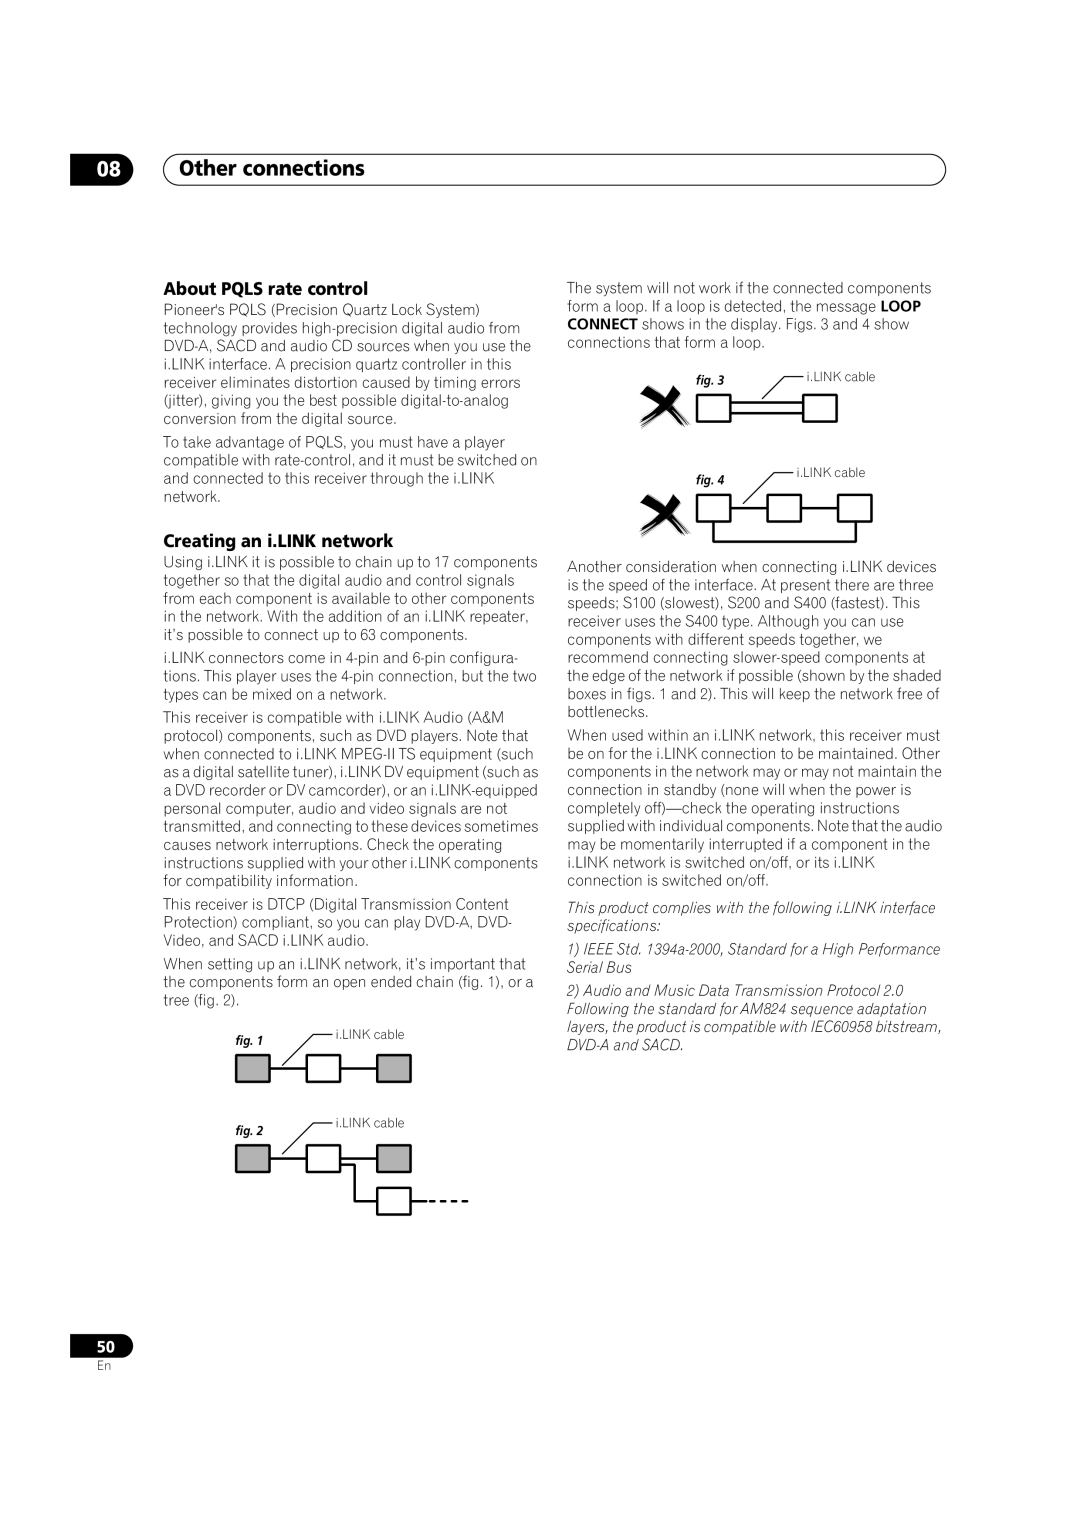 Pioneer VSX-AX2AV-G manual About PQLS rate control, Creating an i.LINK network, 08Other connections, fig, i.LINK cable 